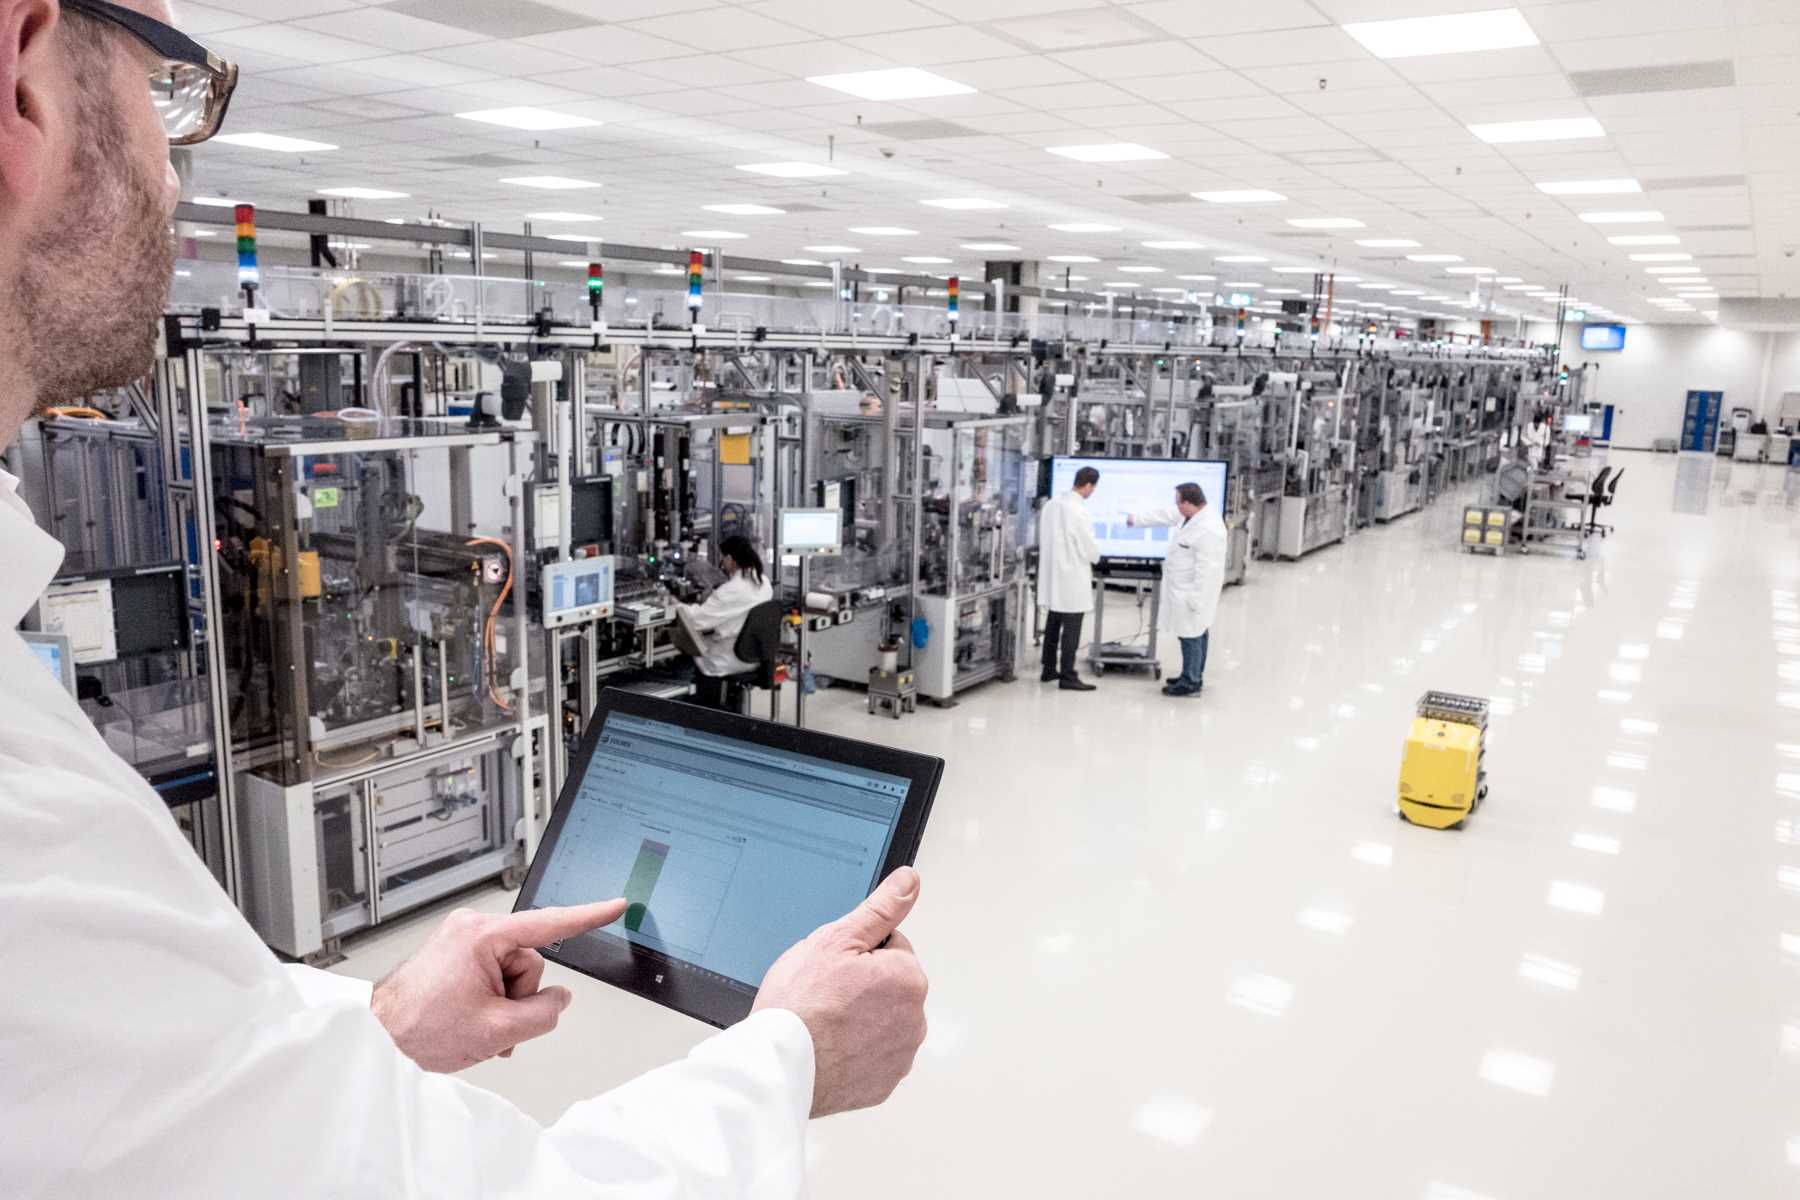 ITK Guided Tour: A man holding a tablet and providing insight into a Smart Factory